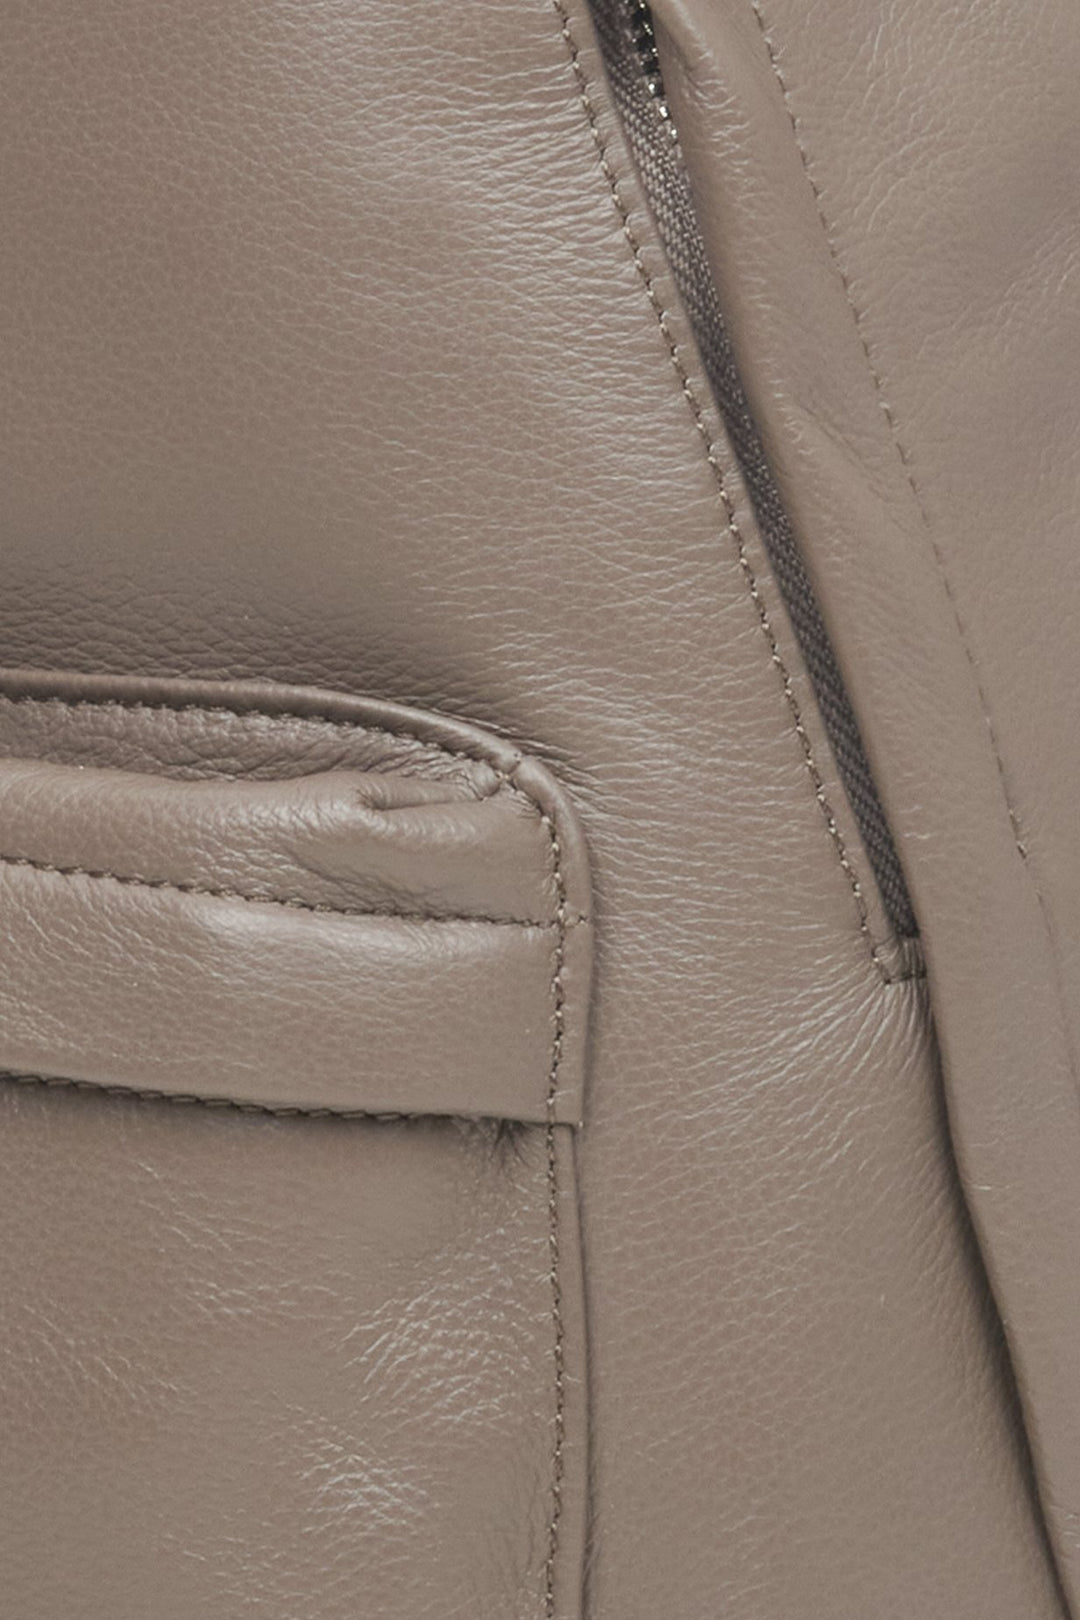 Big women's grey and brown backpack made of genuine leather by Estro - close-up of the details.